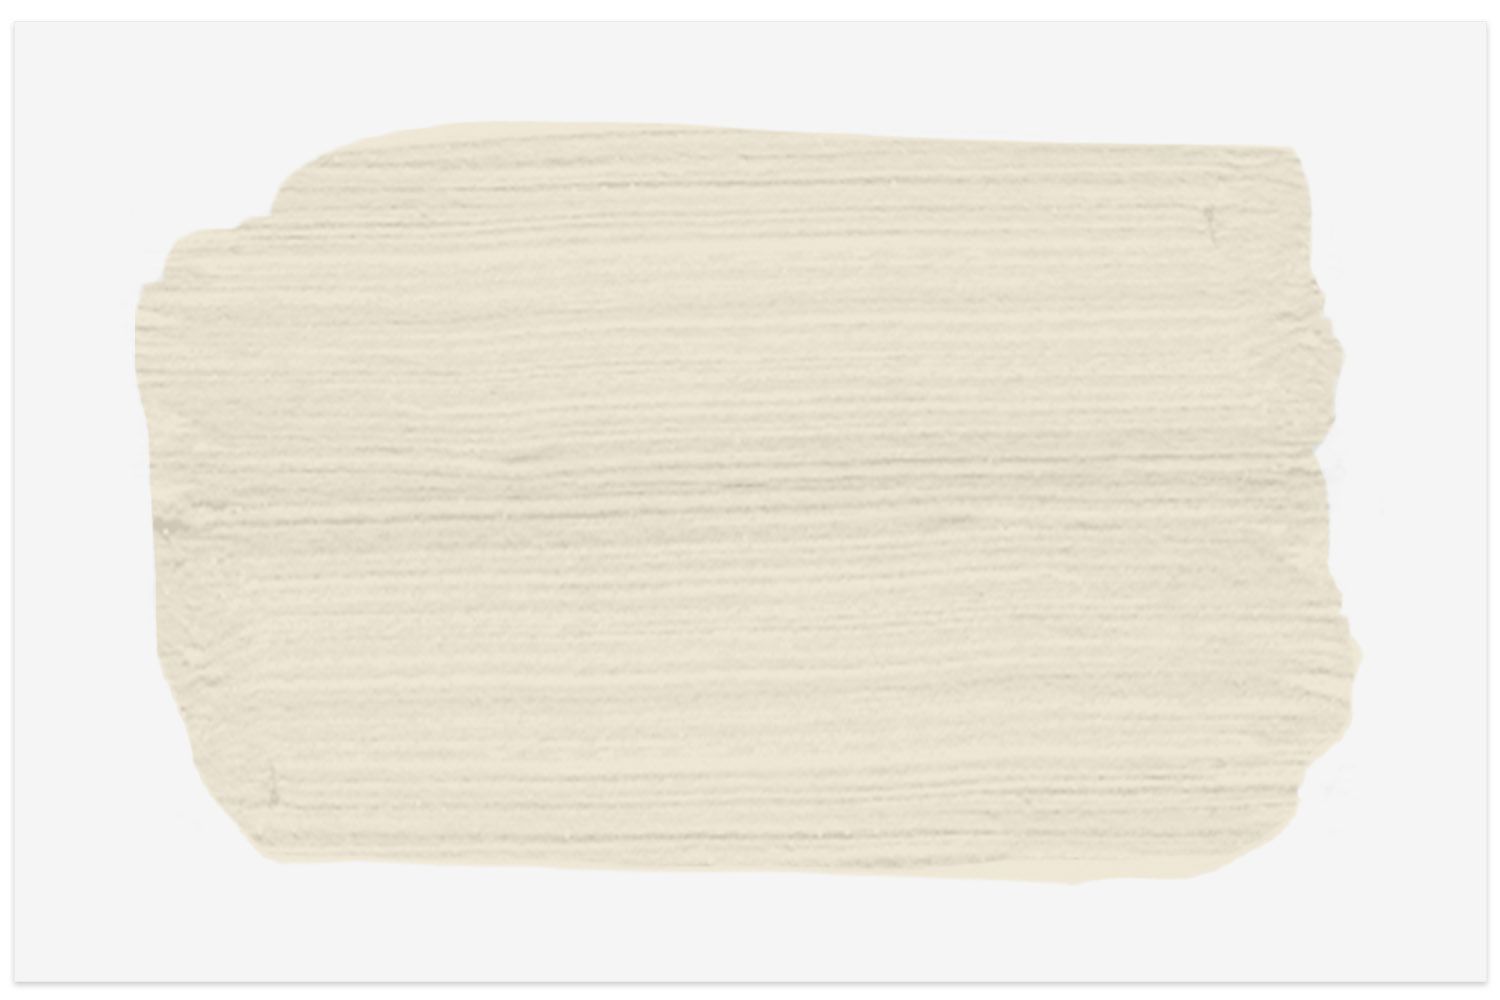 Navajo White paint swatch from Benjamin Moore